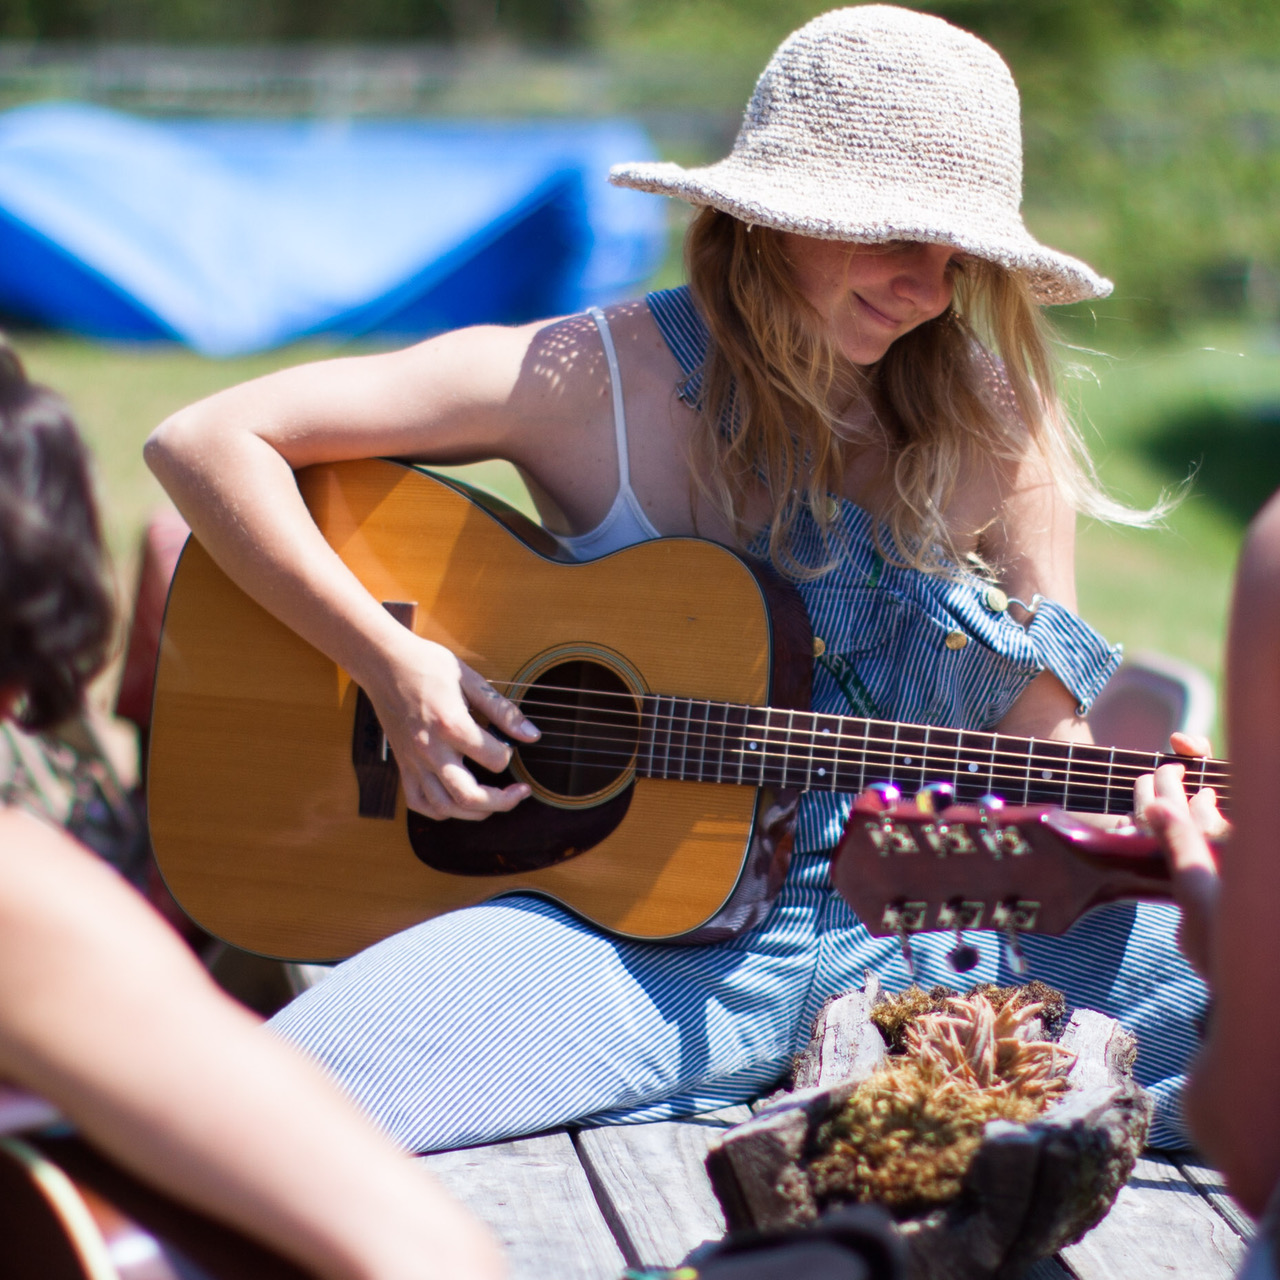 20160420_guitar_fellows_lizzy ross_summer_rebecca downs photography_IMG_6000_lower res.jpg